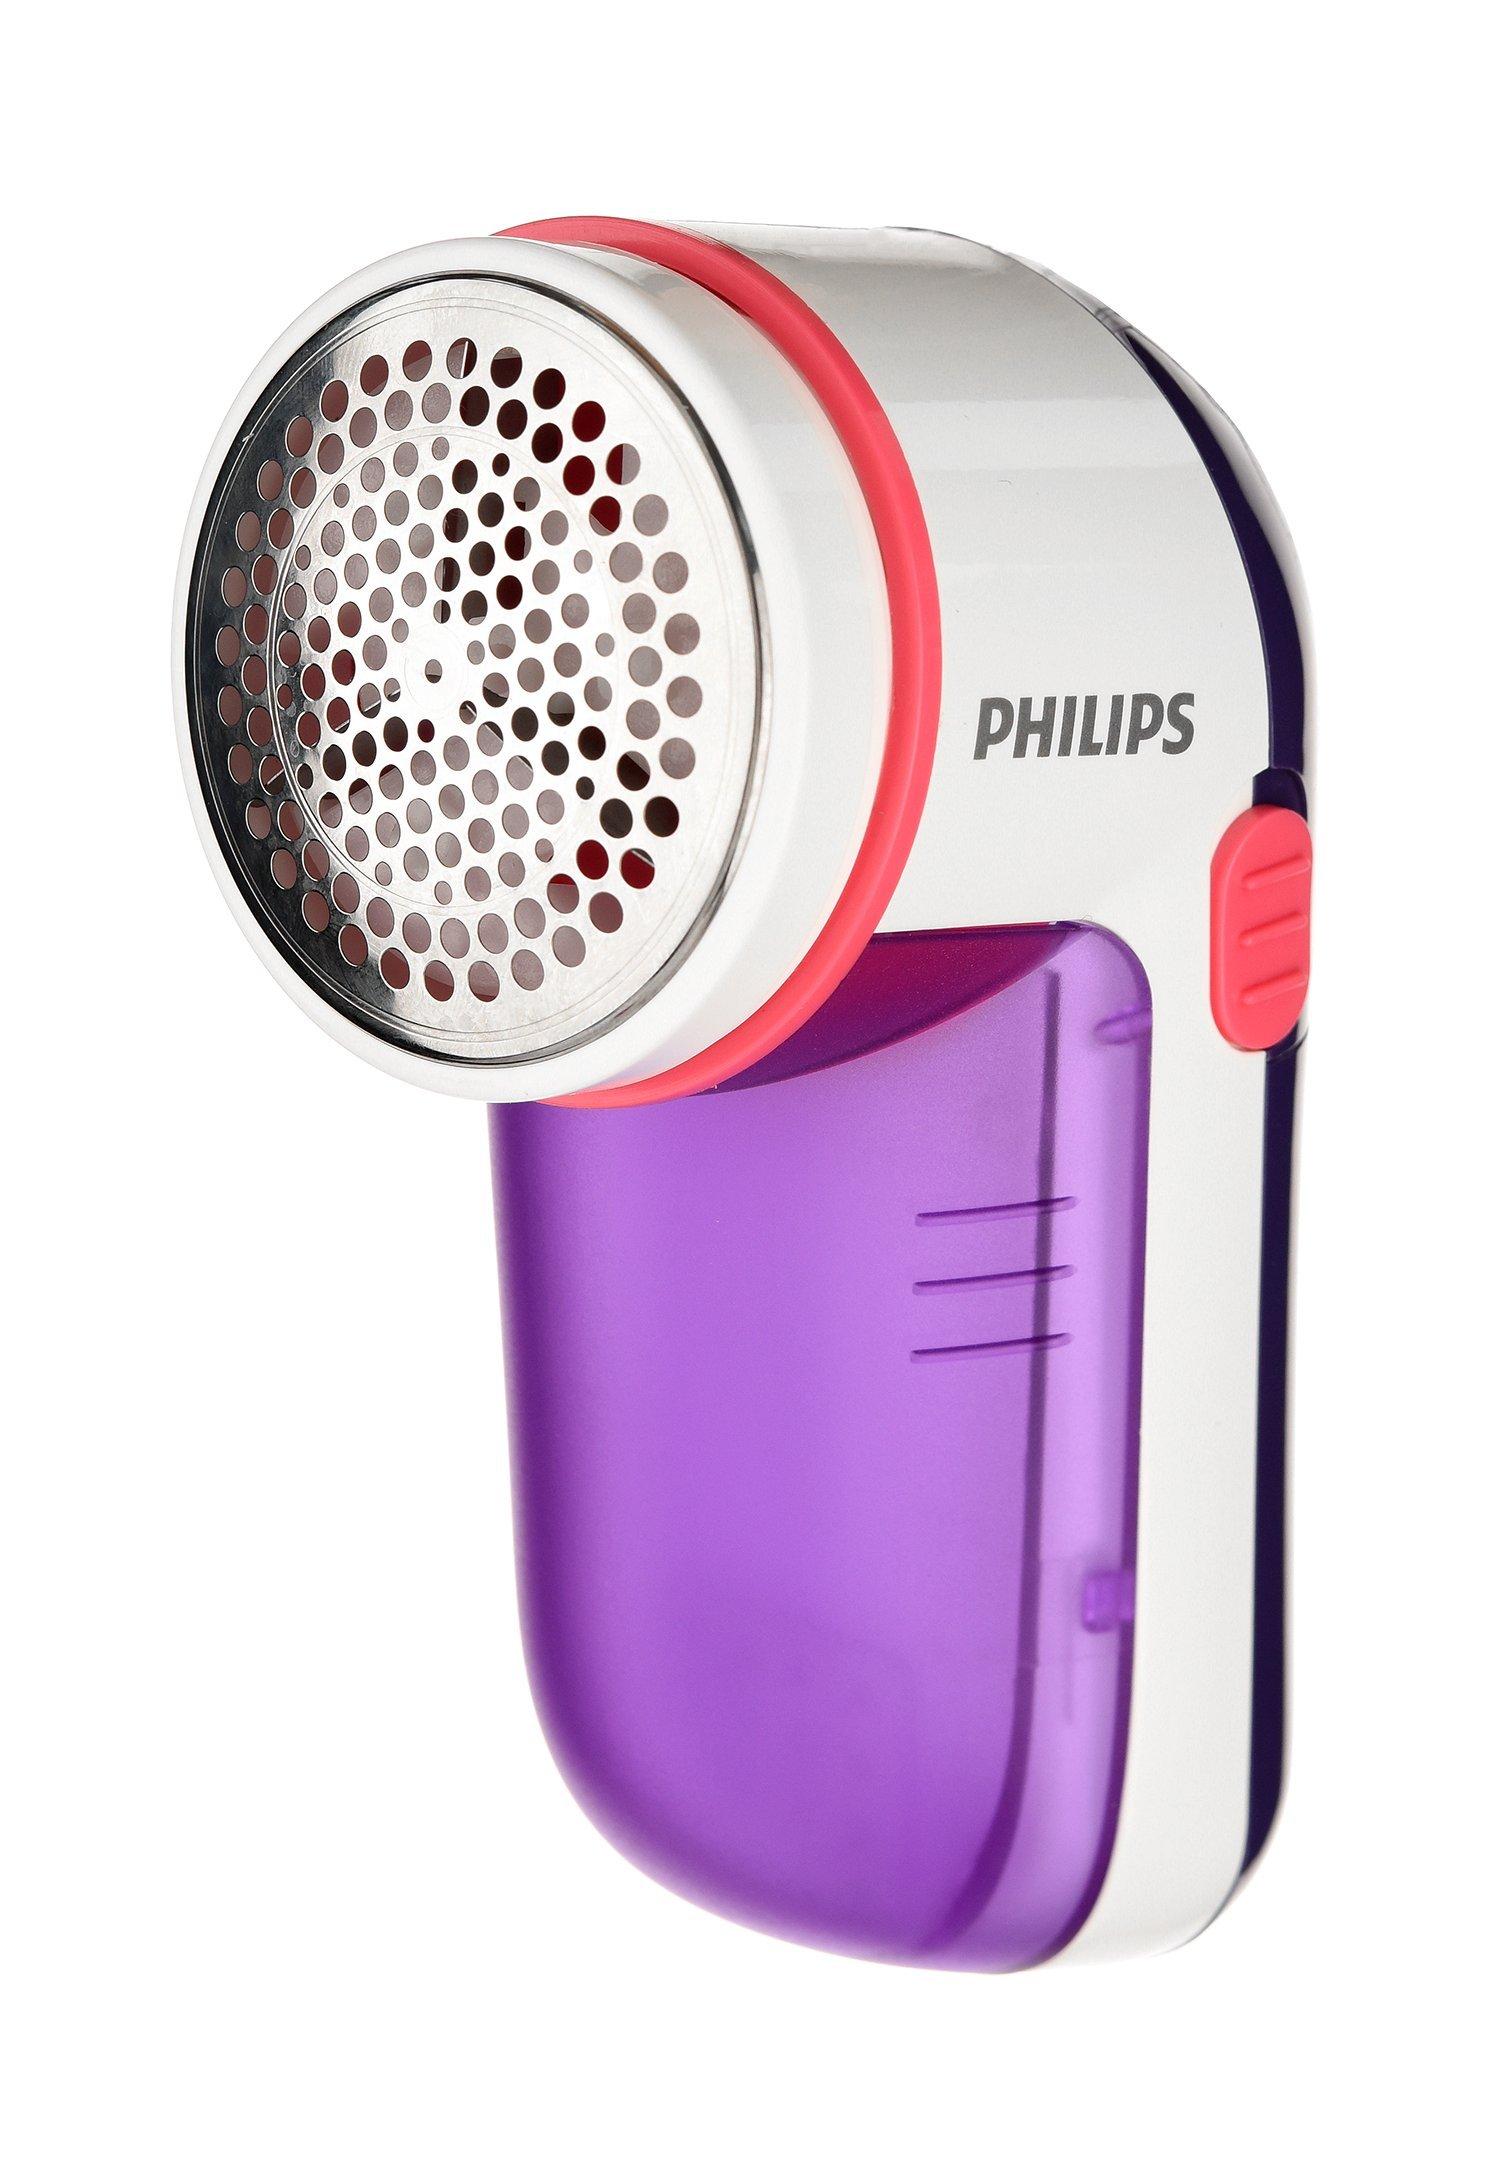 BEST SELLER Philips Fabric Shaver, quick and effective